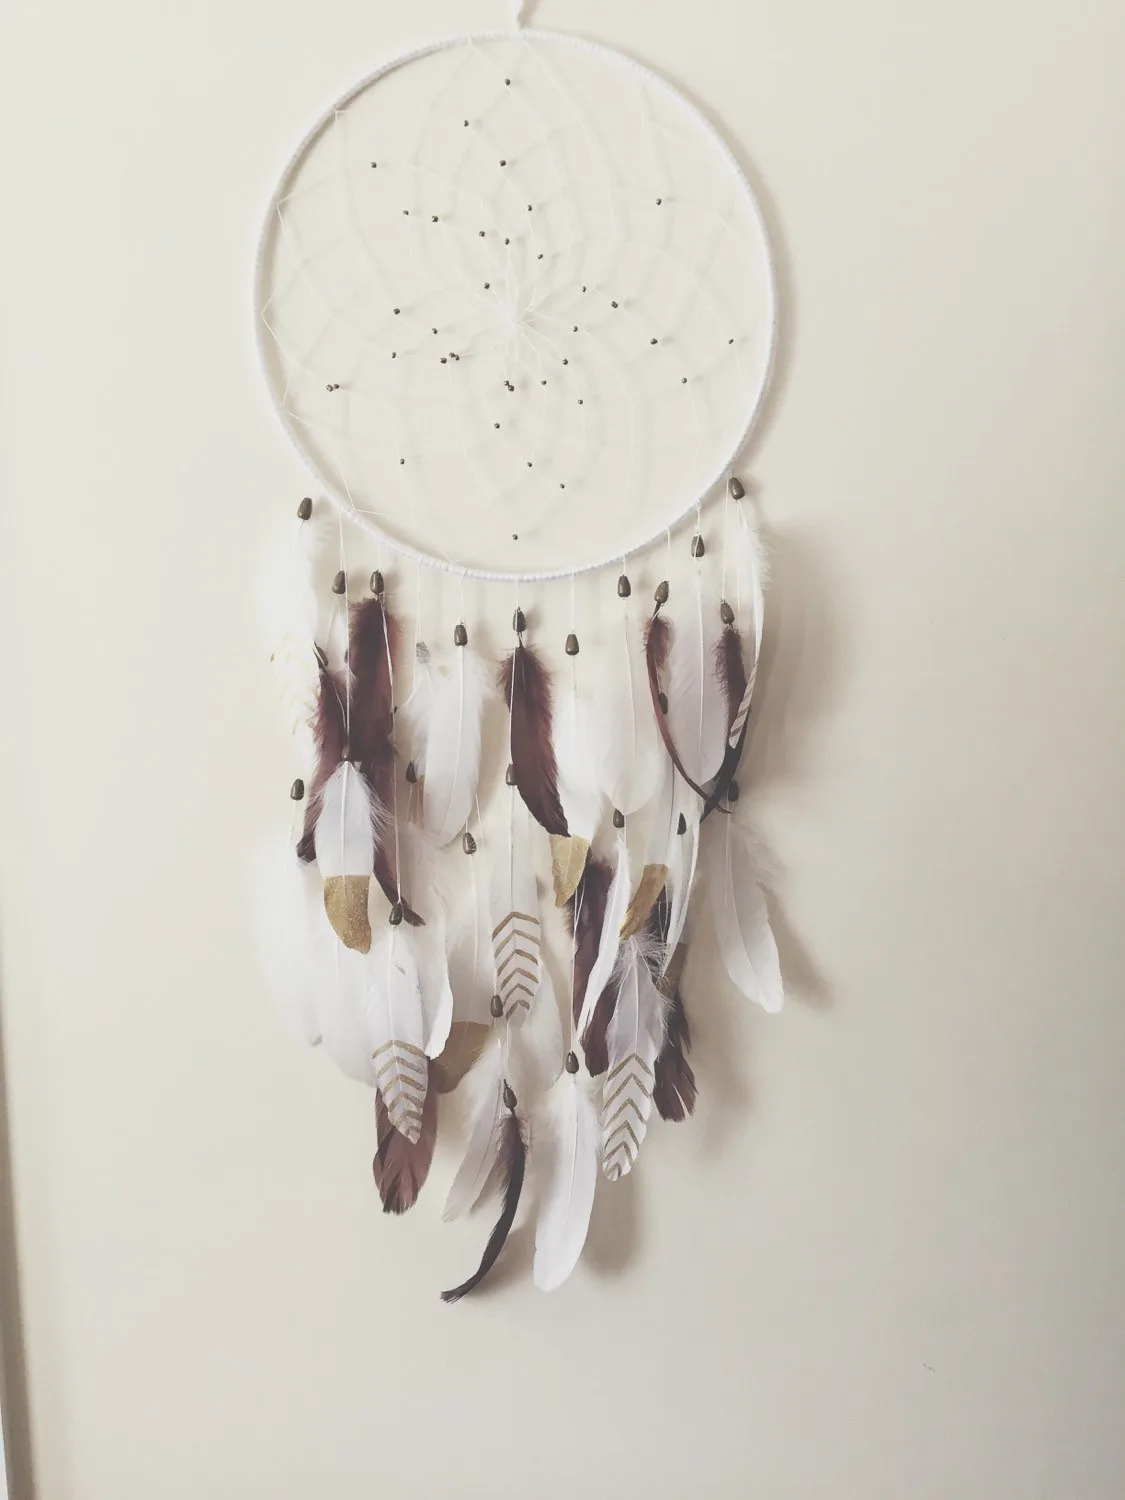 Dreamcatcher from Whispering Wildflowers on Etsy